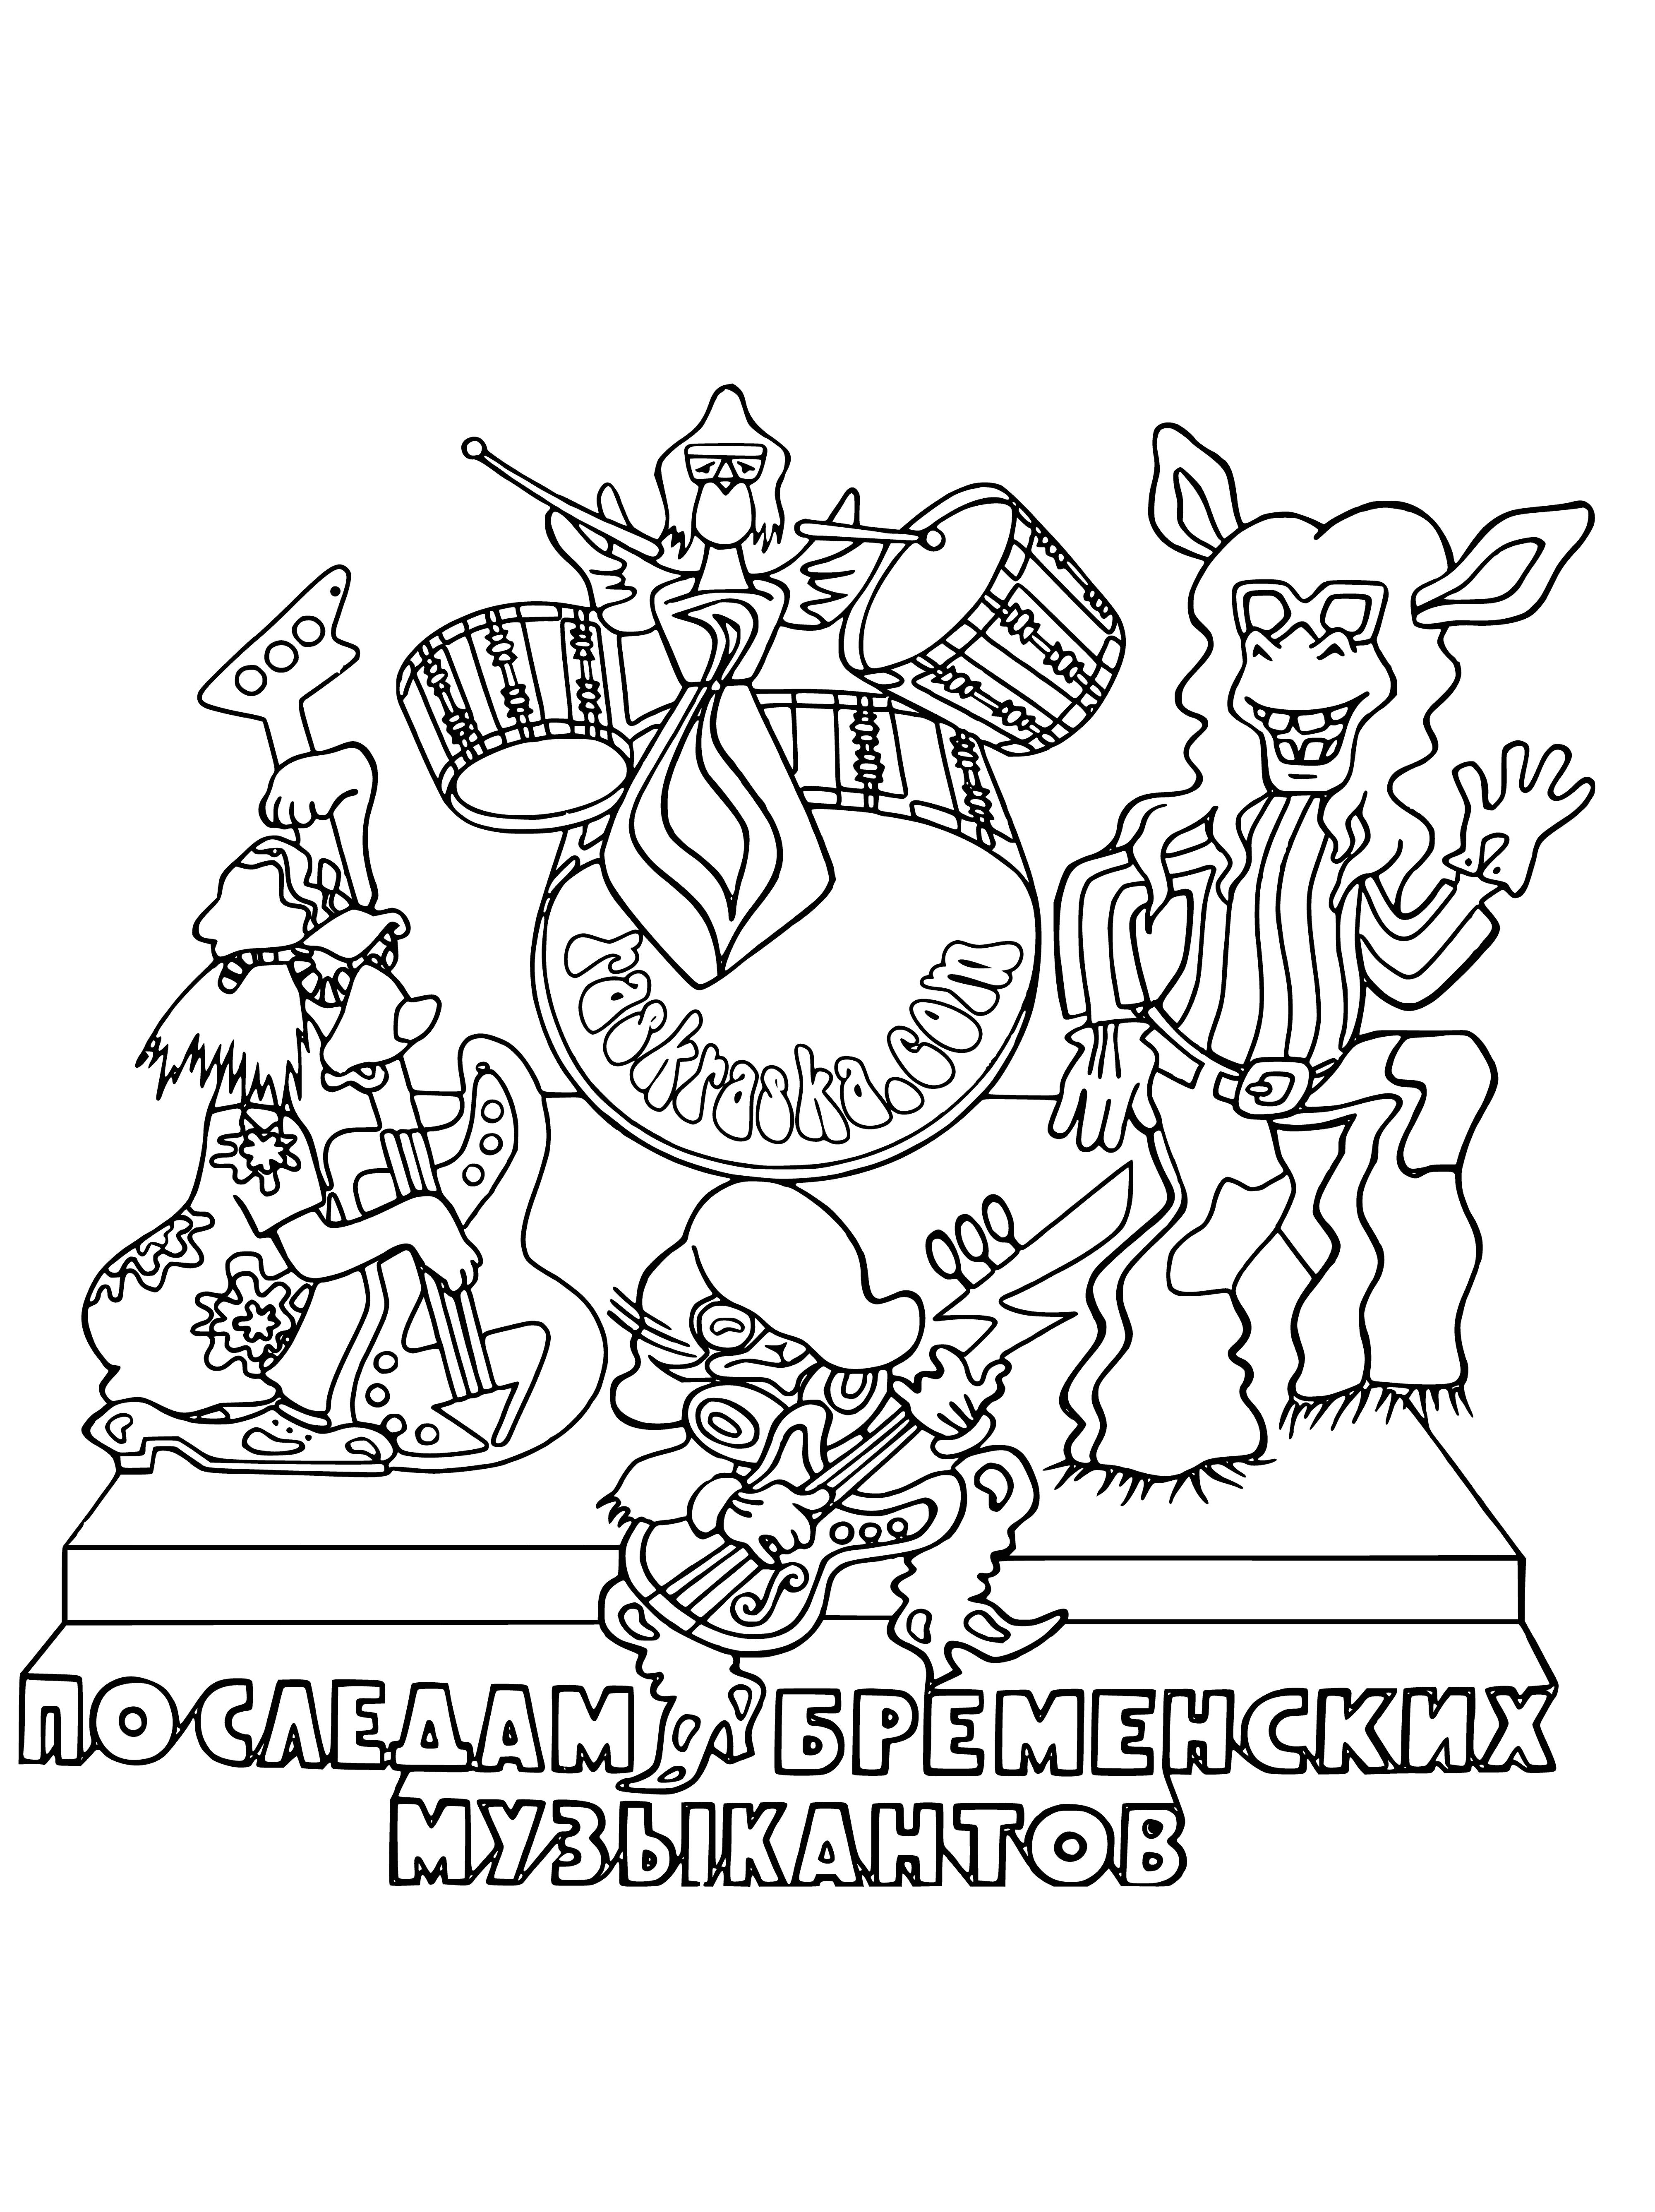 coloring page: 5 animals taking a journey in a line; lead by a donkey they look to the left to a town with trees, blue sky.